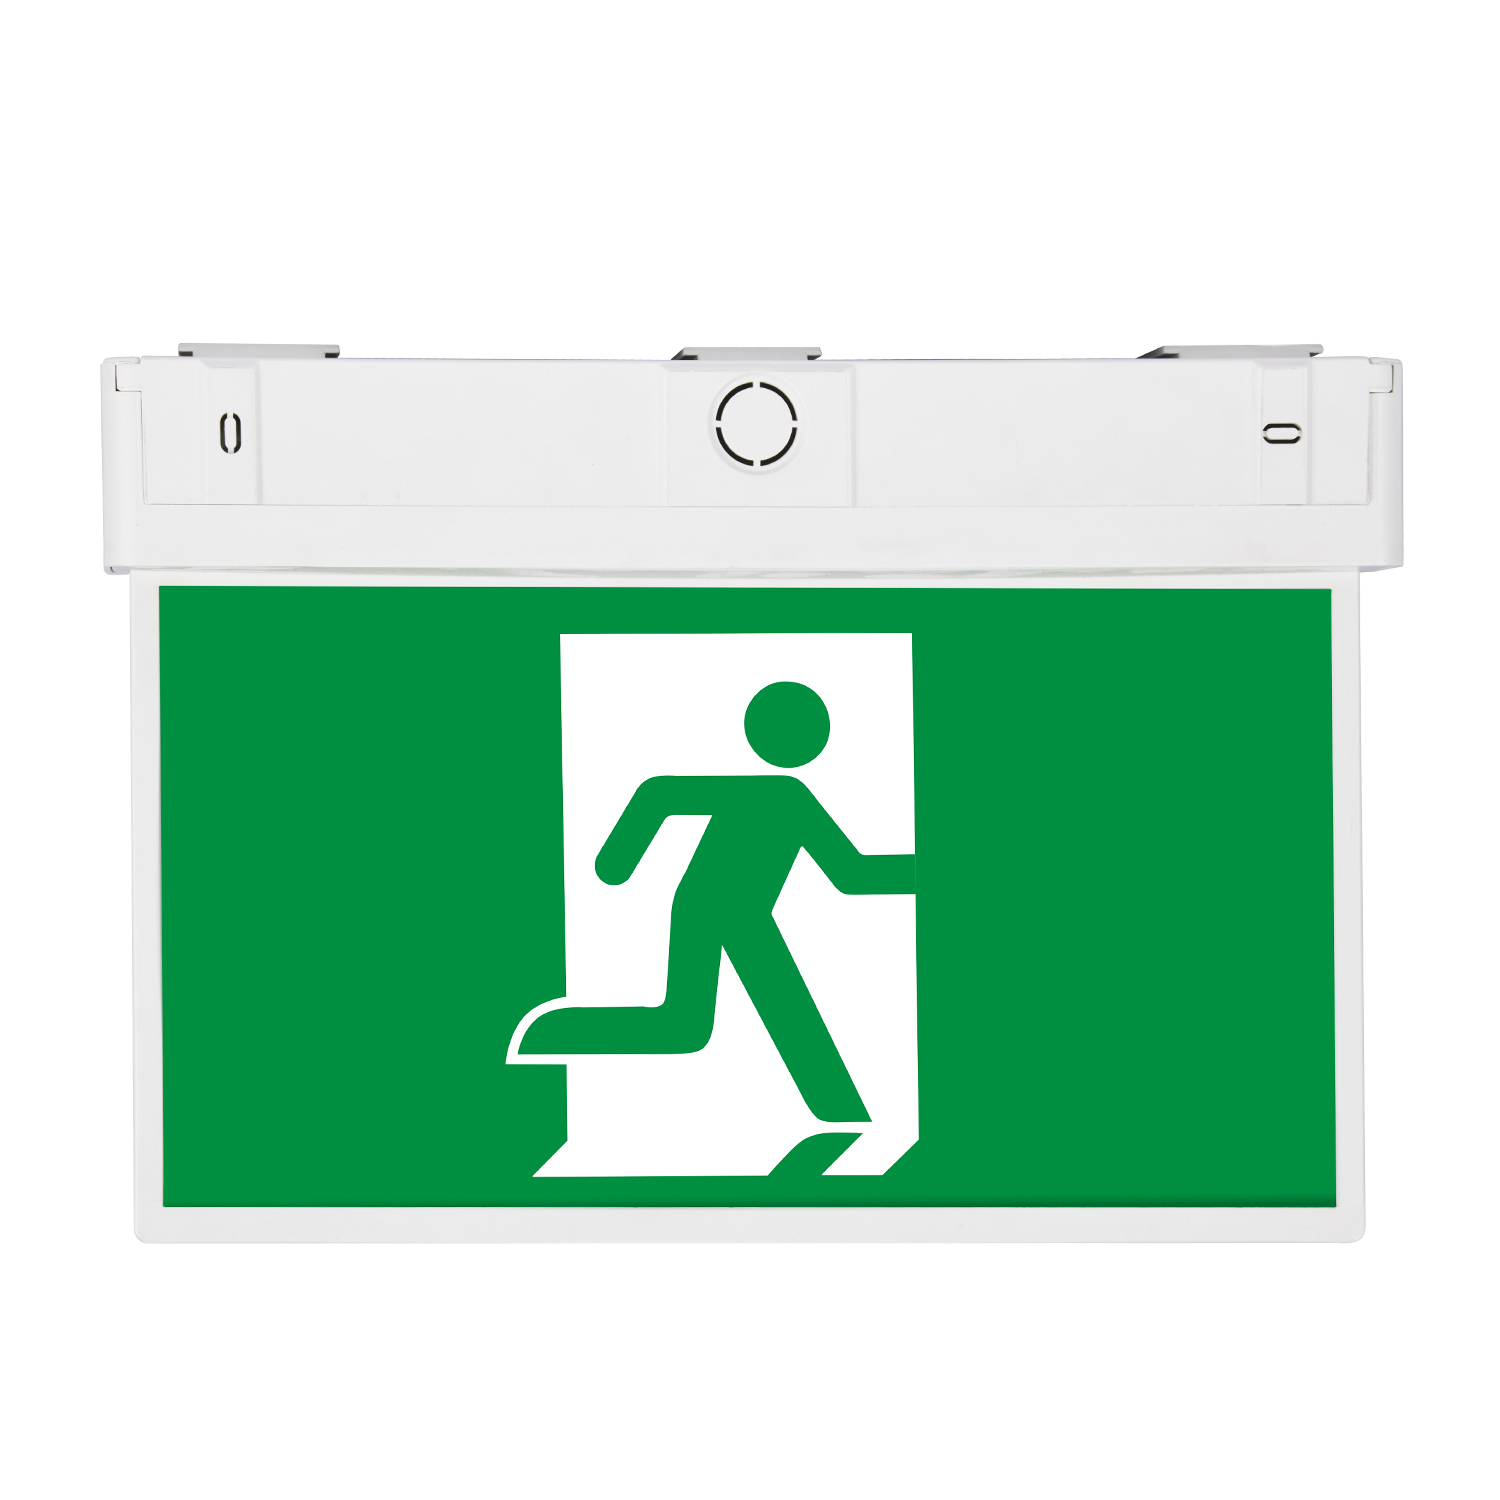 5 Years Warranty Emergency Exit Sign Surfaced Wall Recessed Mounted Exit